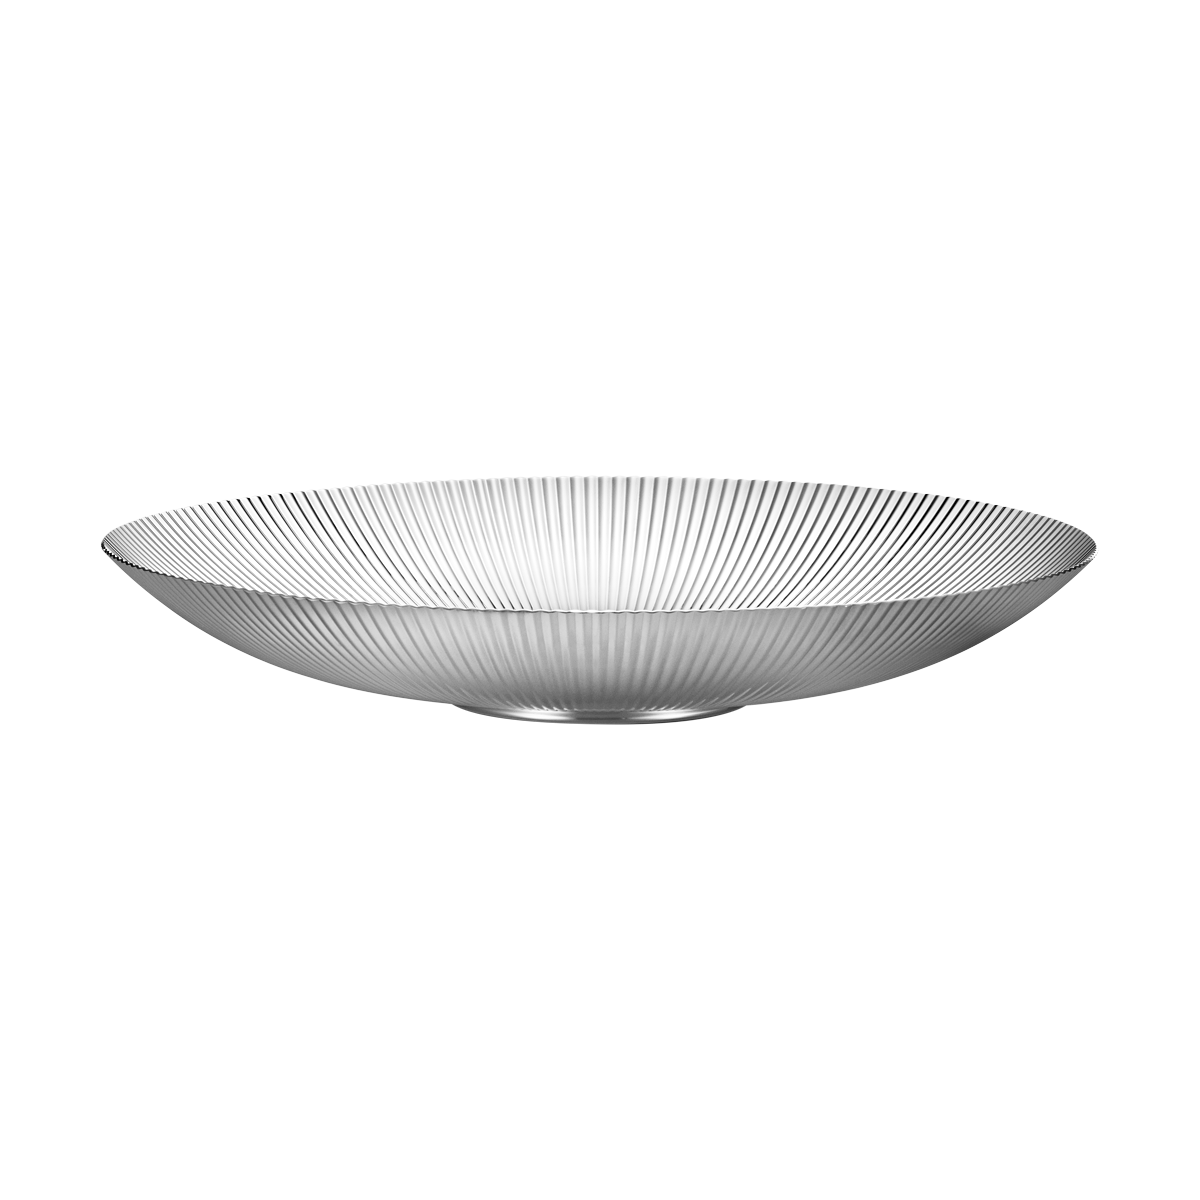 Primary image for Bernadotte by Georg Jensen Stainless Steel Serving Bowl Low - New